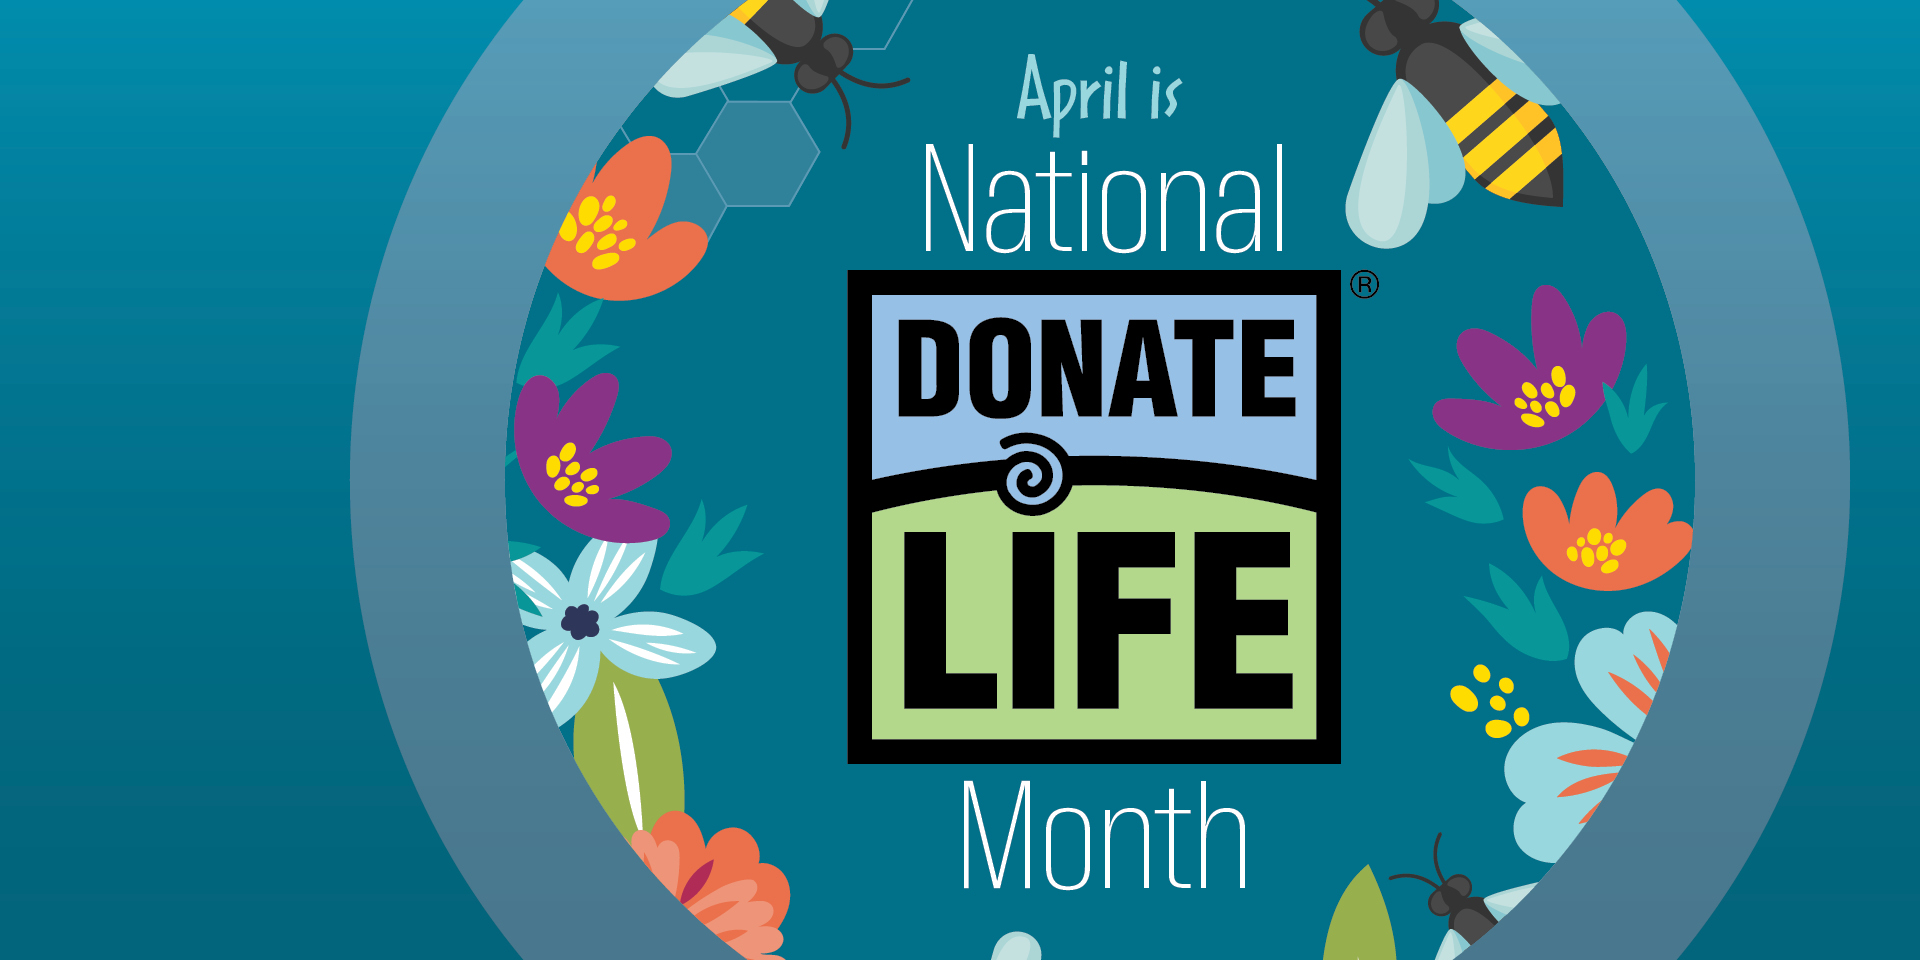 National Donate Life Month logo